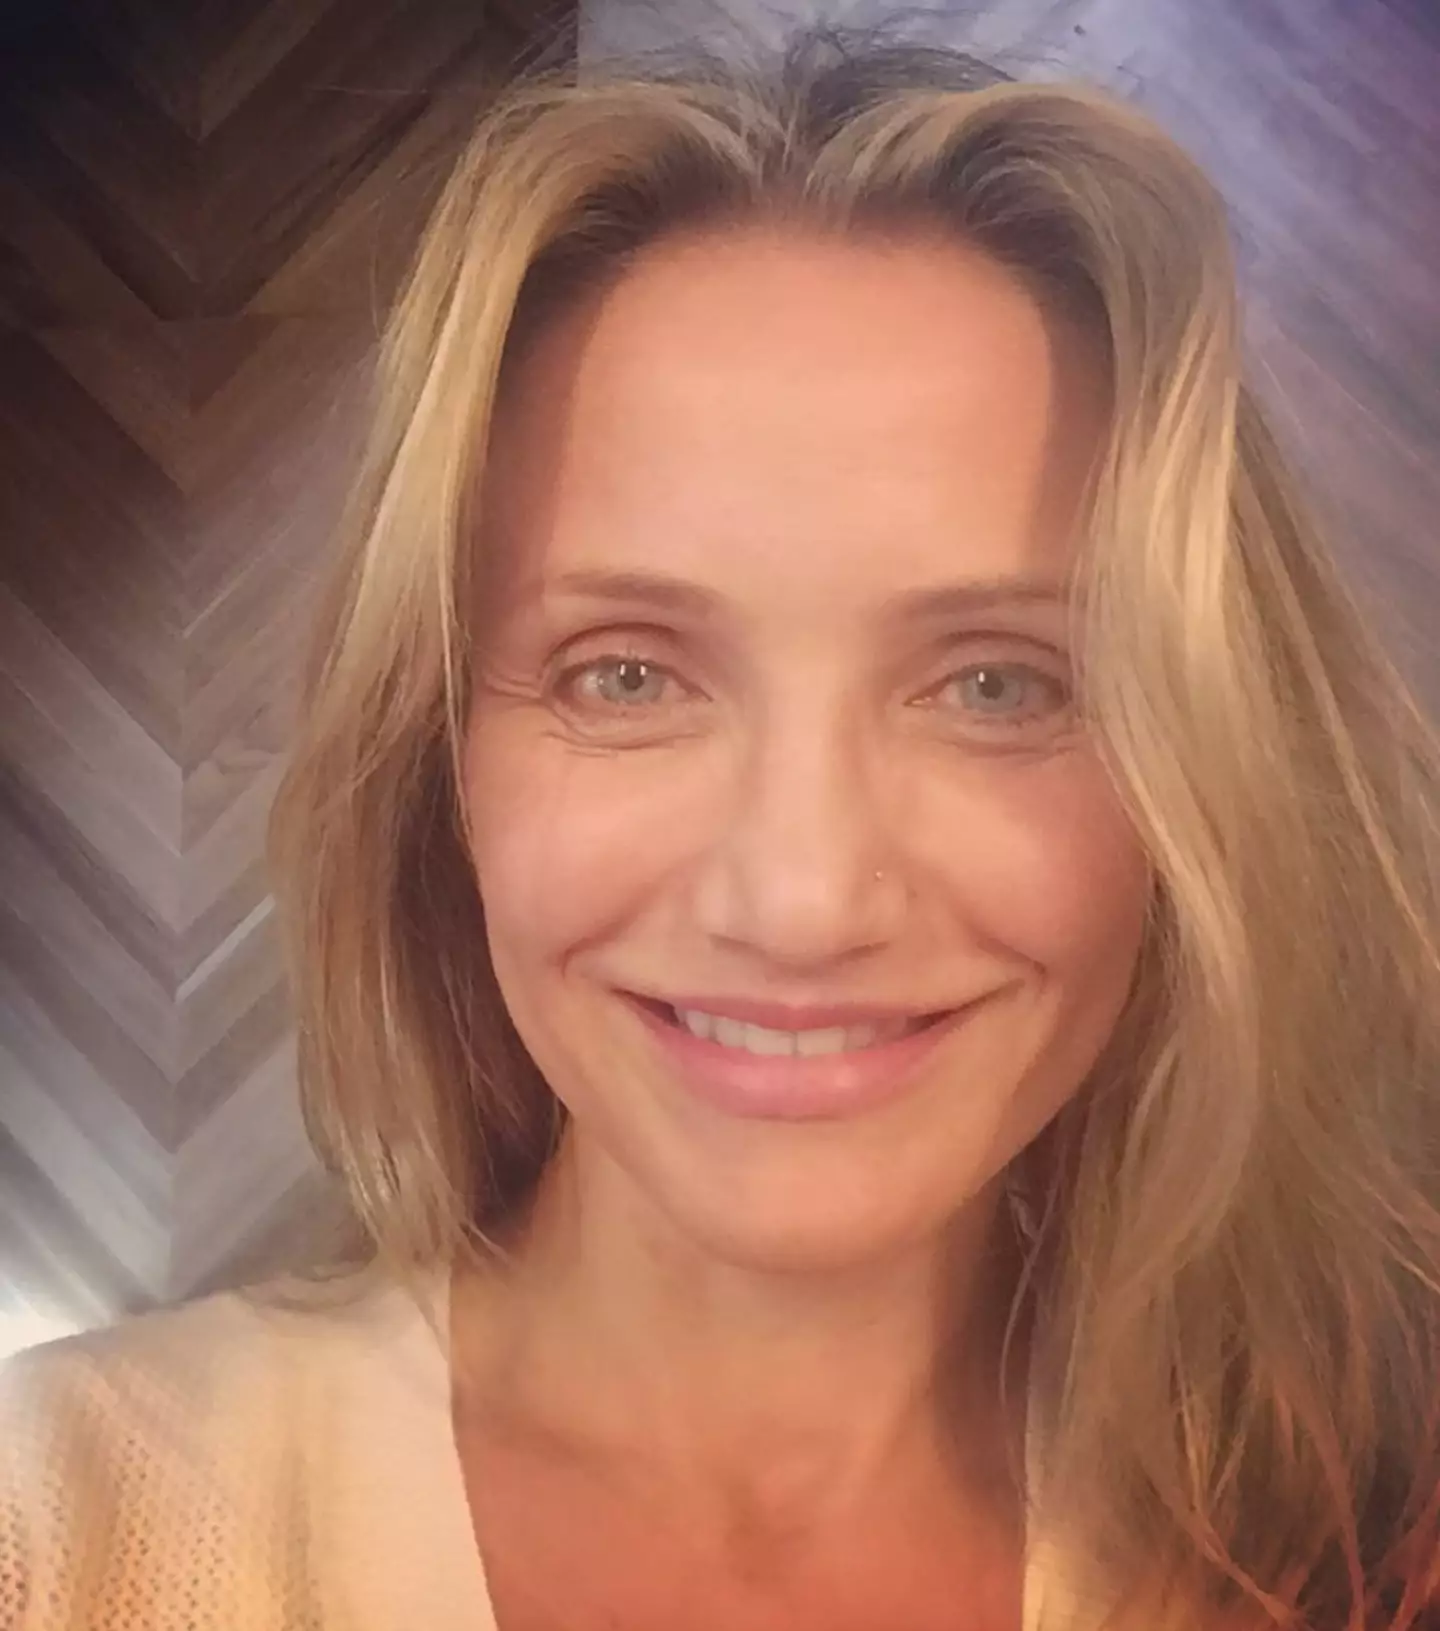 Cameron Diaz once opened up about her experiences with motherhood. (Instagram/@camerondiaz)